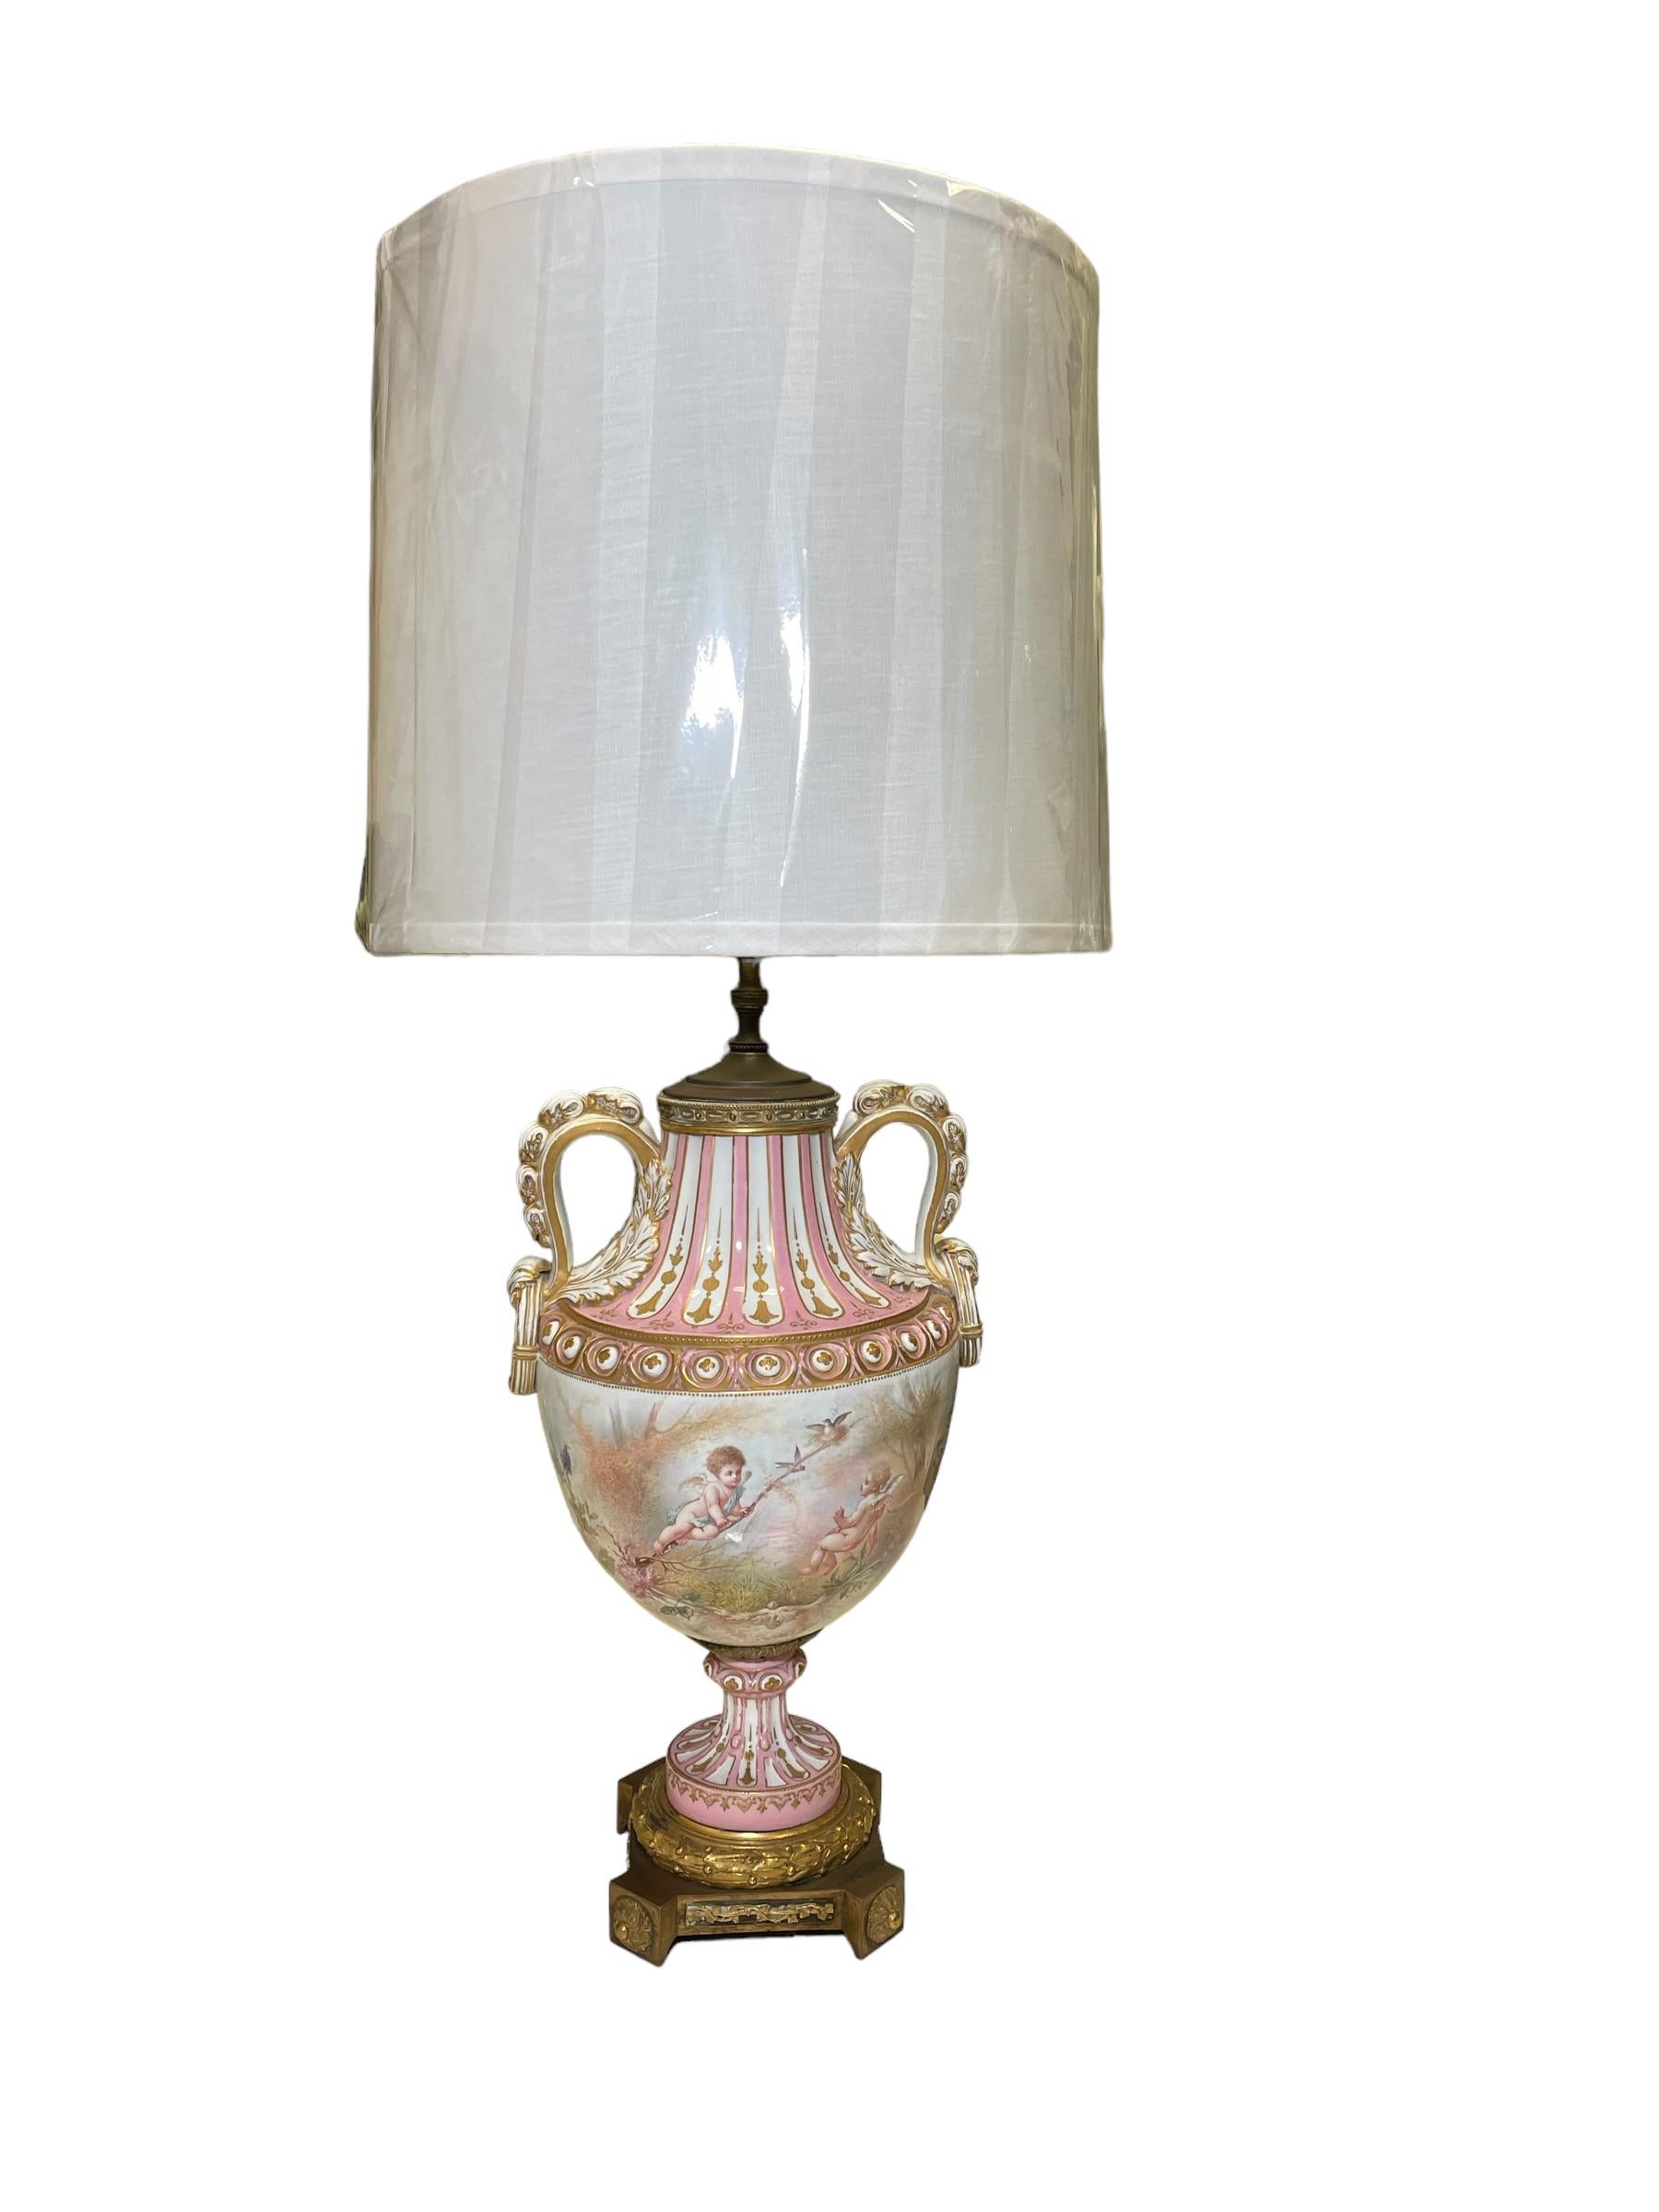 M. Demonceaux Sevres Style Porcelain Bronze Mounted Urn Table Lamp For Sale 11